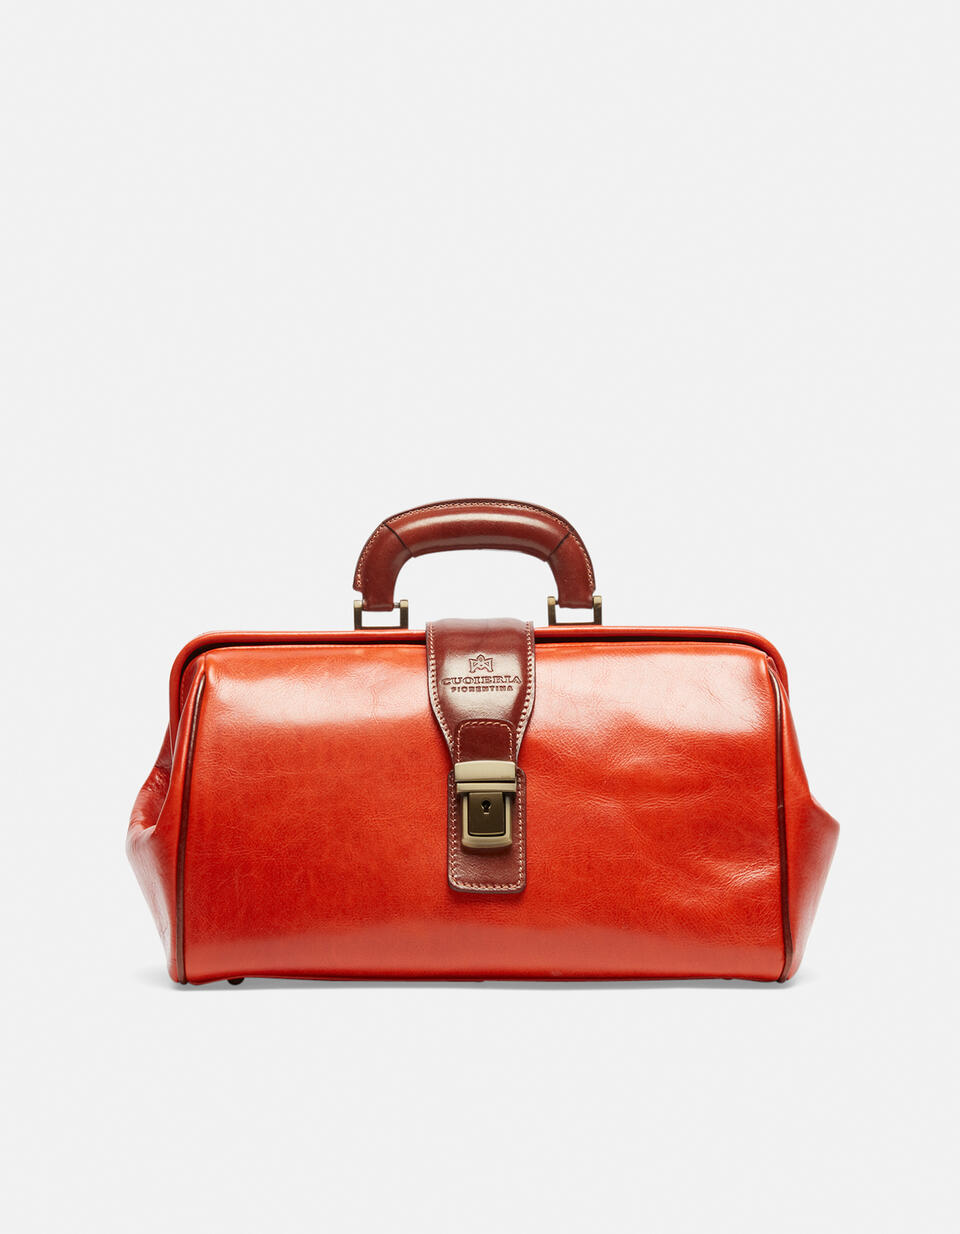 Small leather doctor's bag - Doctor Bags | Briefcases ARANCIOBICOLORE - Doctor Bags | BriefcasesCuoieria Fiorentina